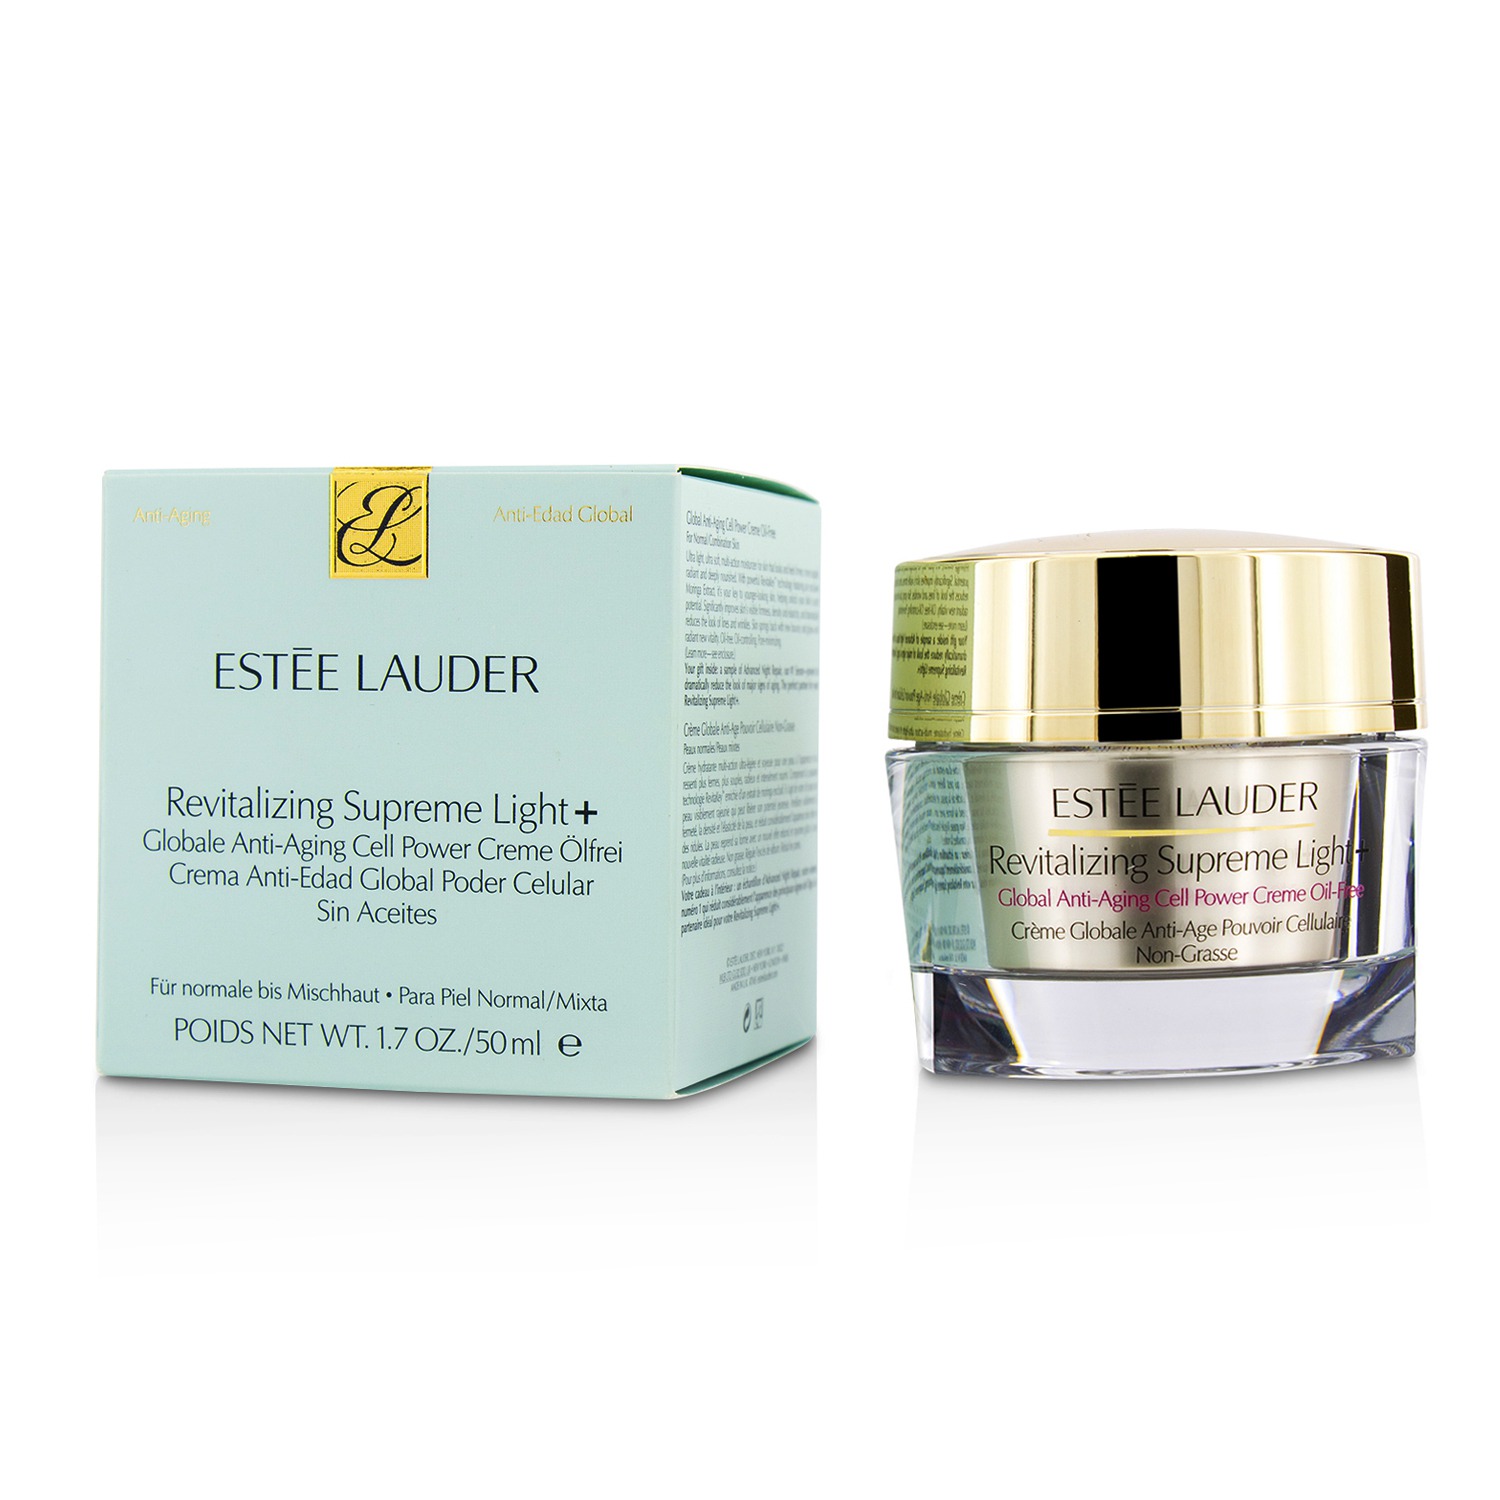 Revitalizing Supreme Light + Global Anti-Aging Cell Power Creme Oil-Free - For Normal/ Combination Skin Estee Lauder Image